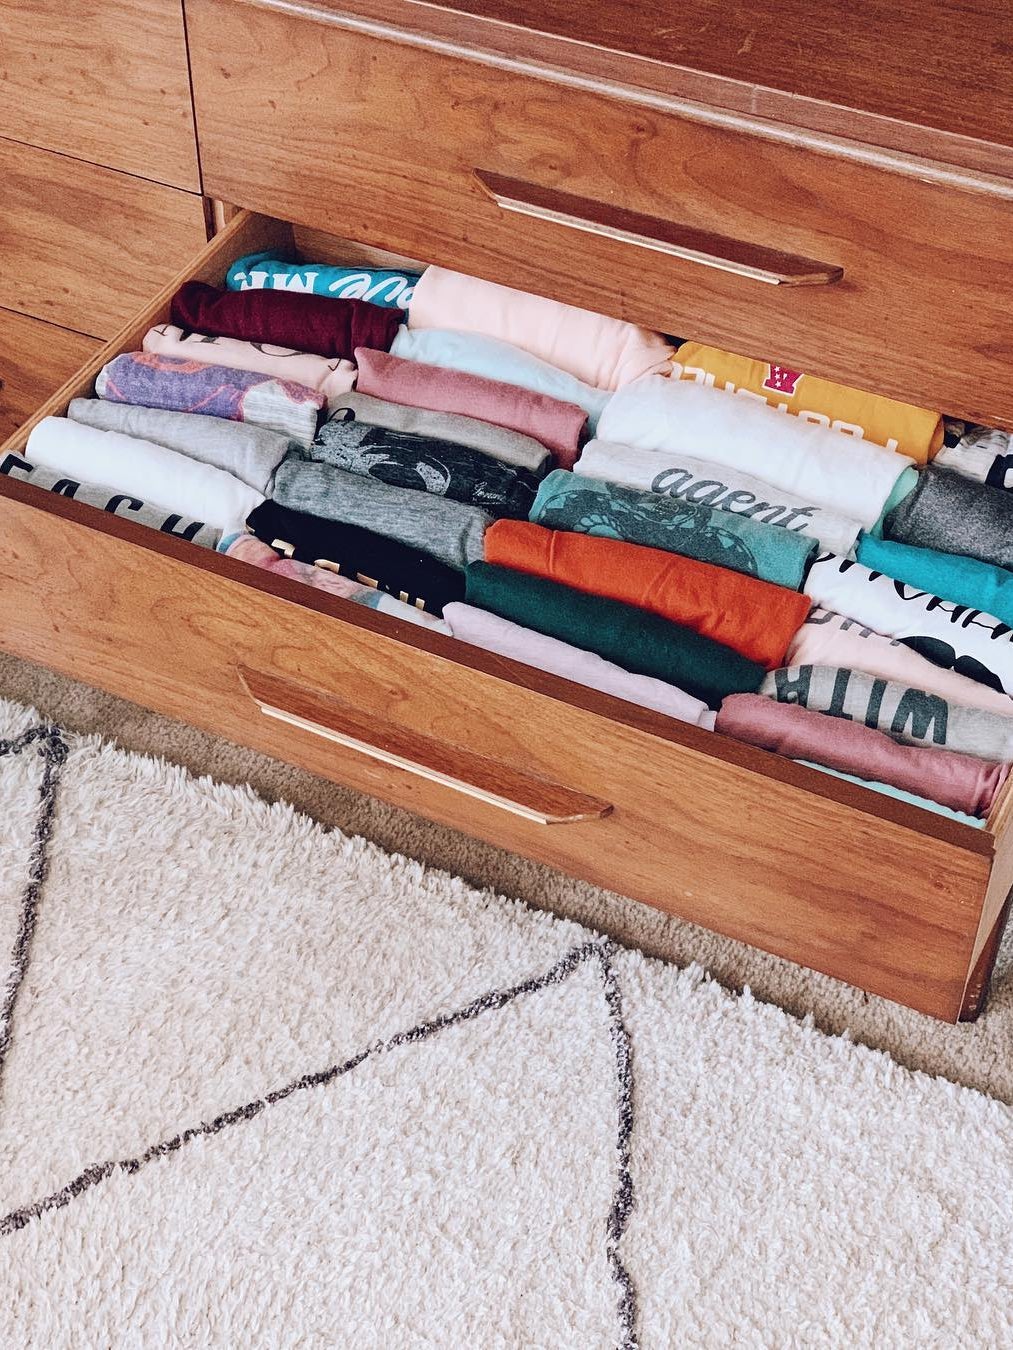 You Can Thank Marie Kondo for This Satisfying Instagram Trend